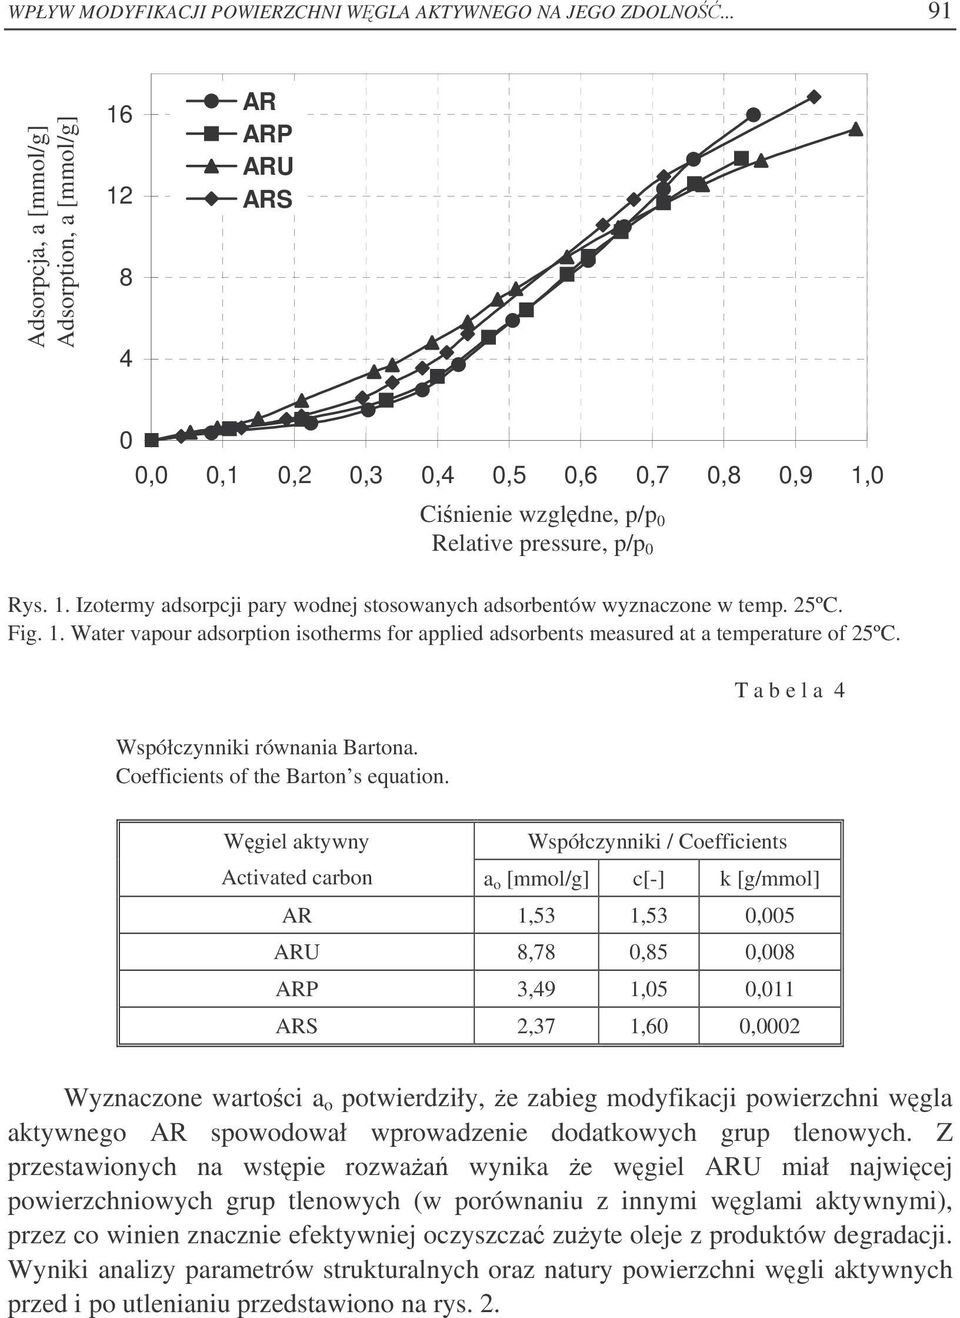 Relative pressure, p/p 0 Rys. 1. Izotermy adsorpcji pary wodnej stosowanych adsorbentów wyznaczone w temp. 25ºC. Fig. 1. Water vapour adsorption isotherms for applied adsorbents measured at a temperature of 25ºC.